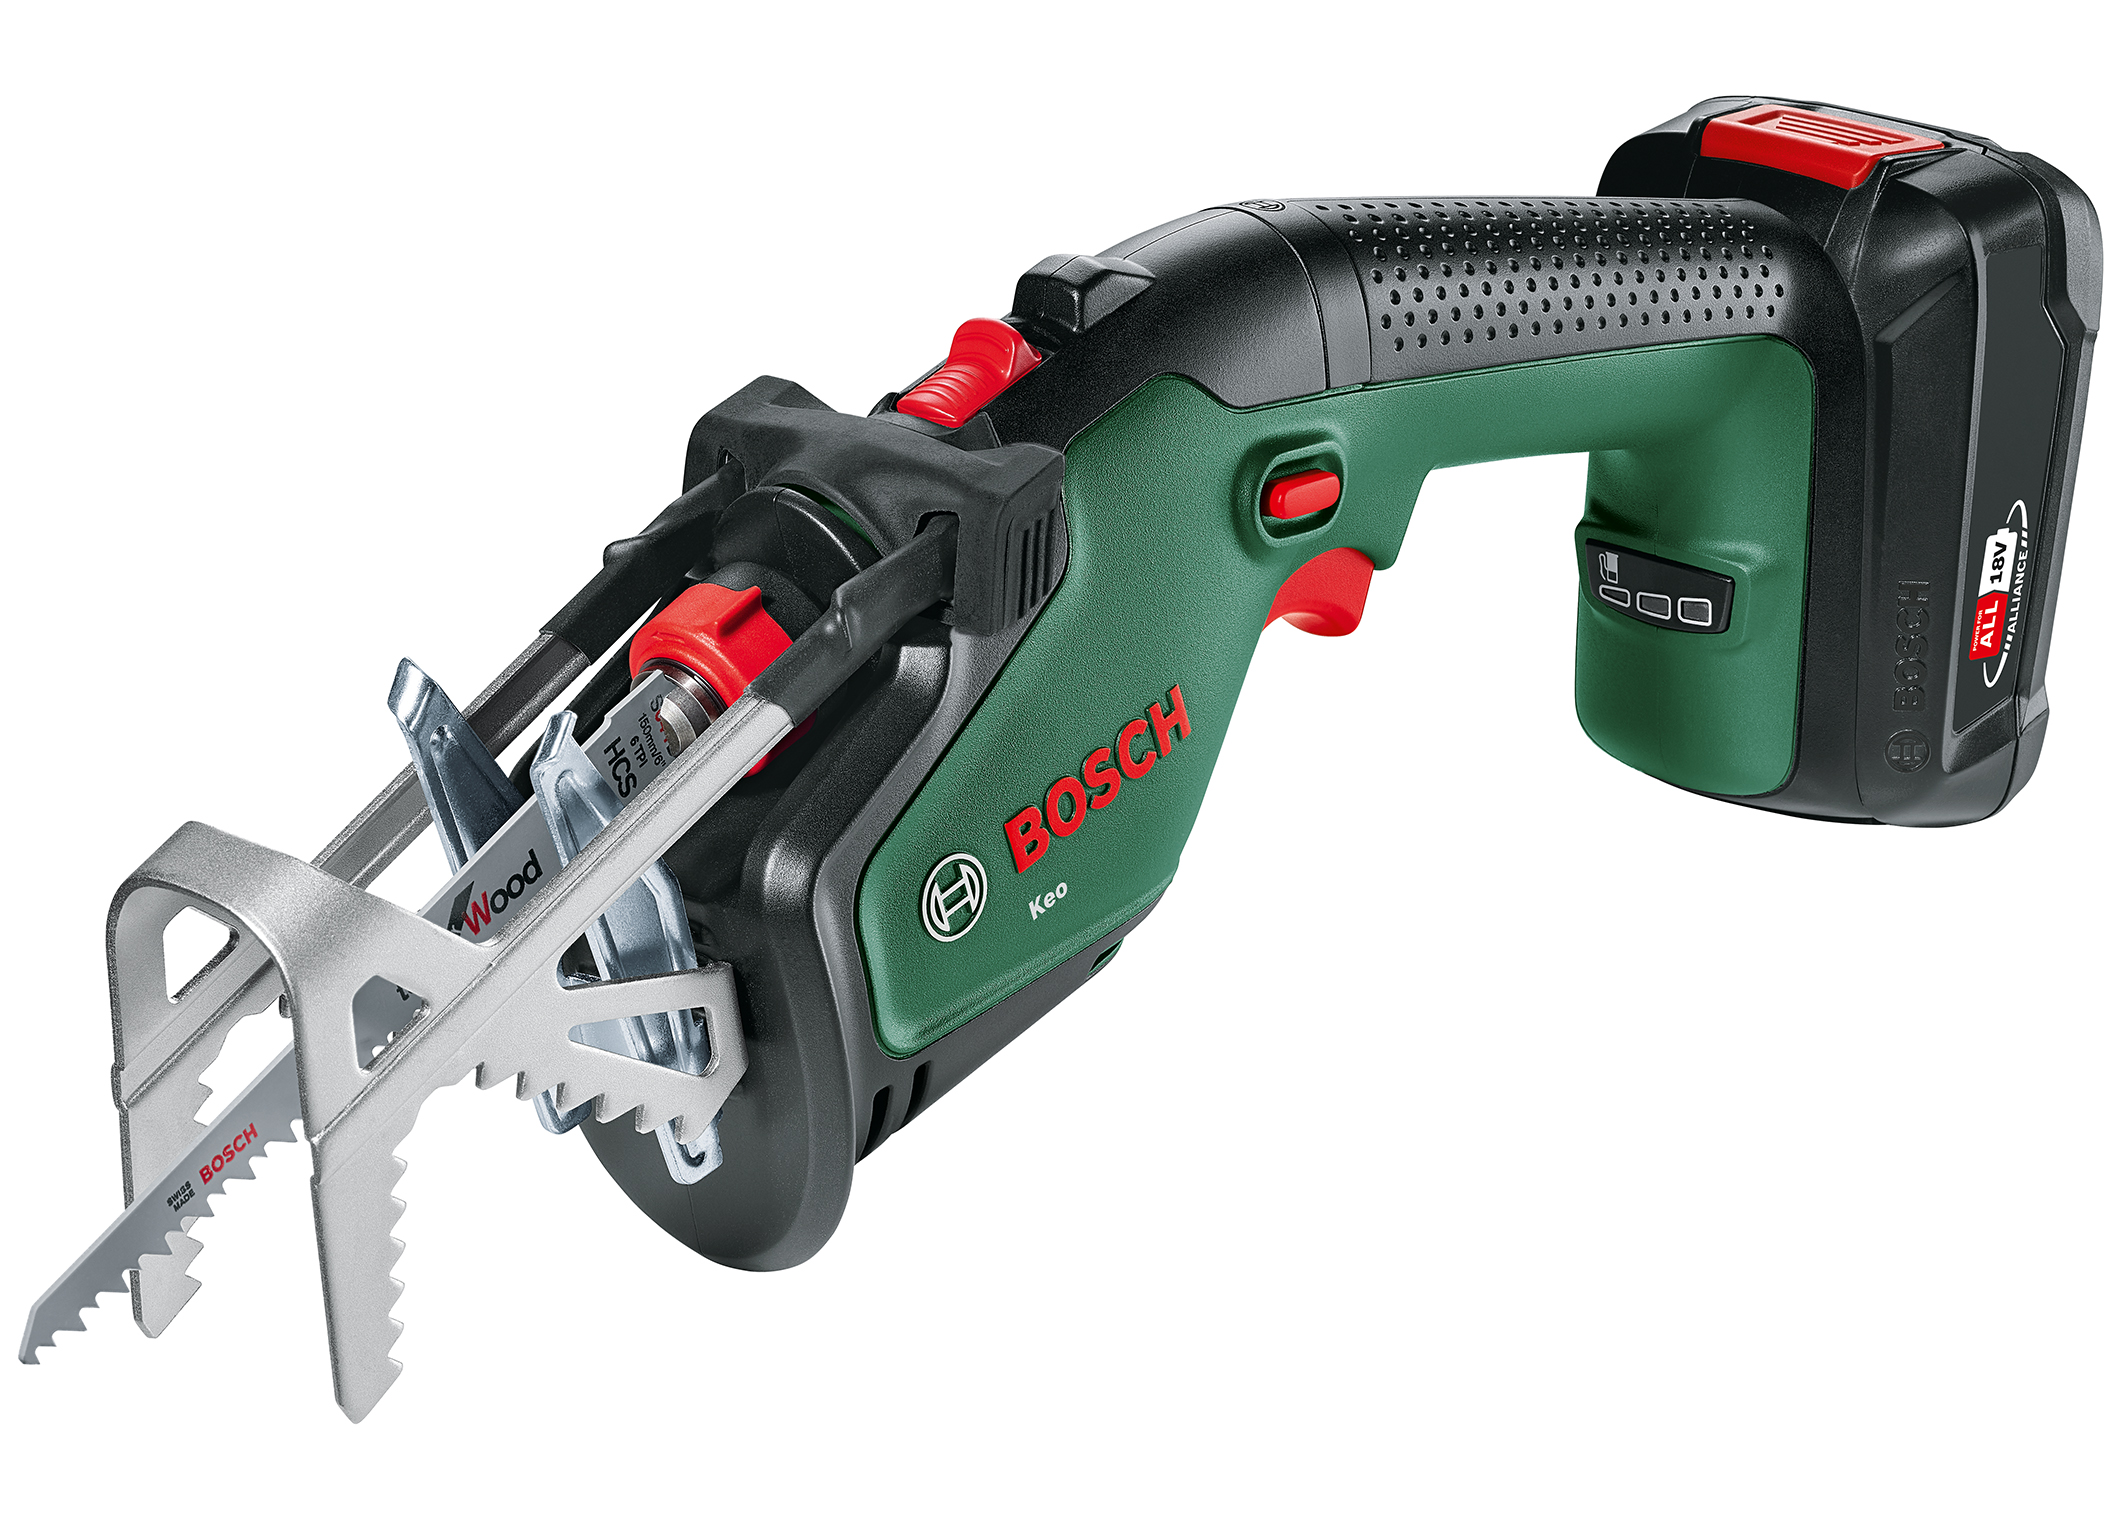 New member in the ‘18V Power for All System‘: Powerful and precise cordless garden saw Keo